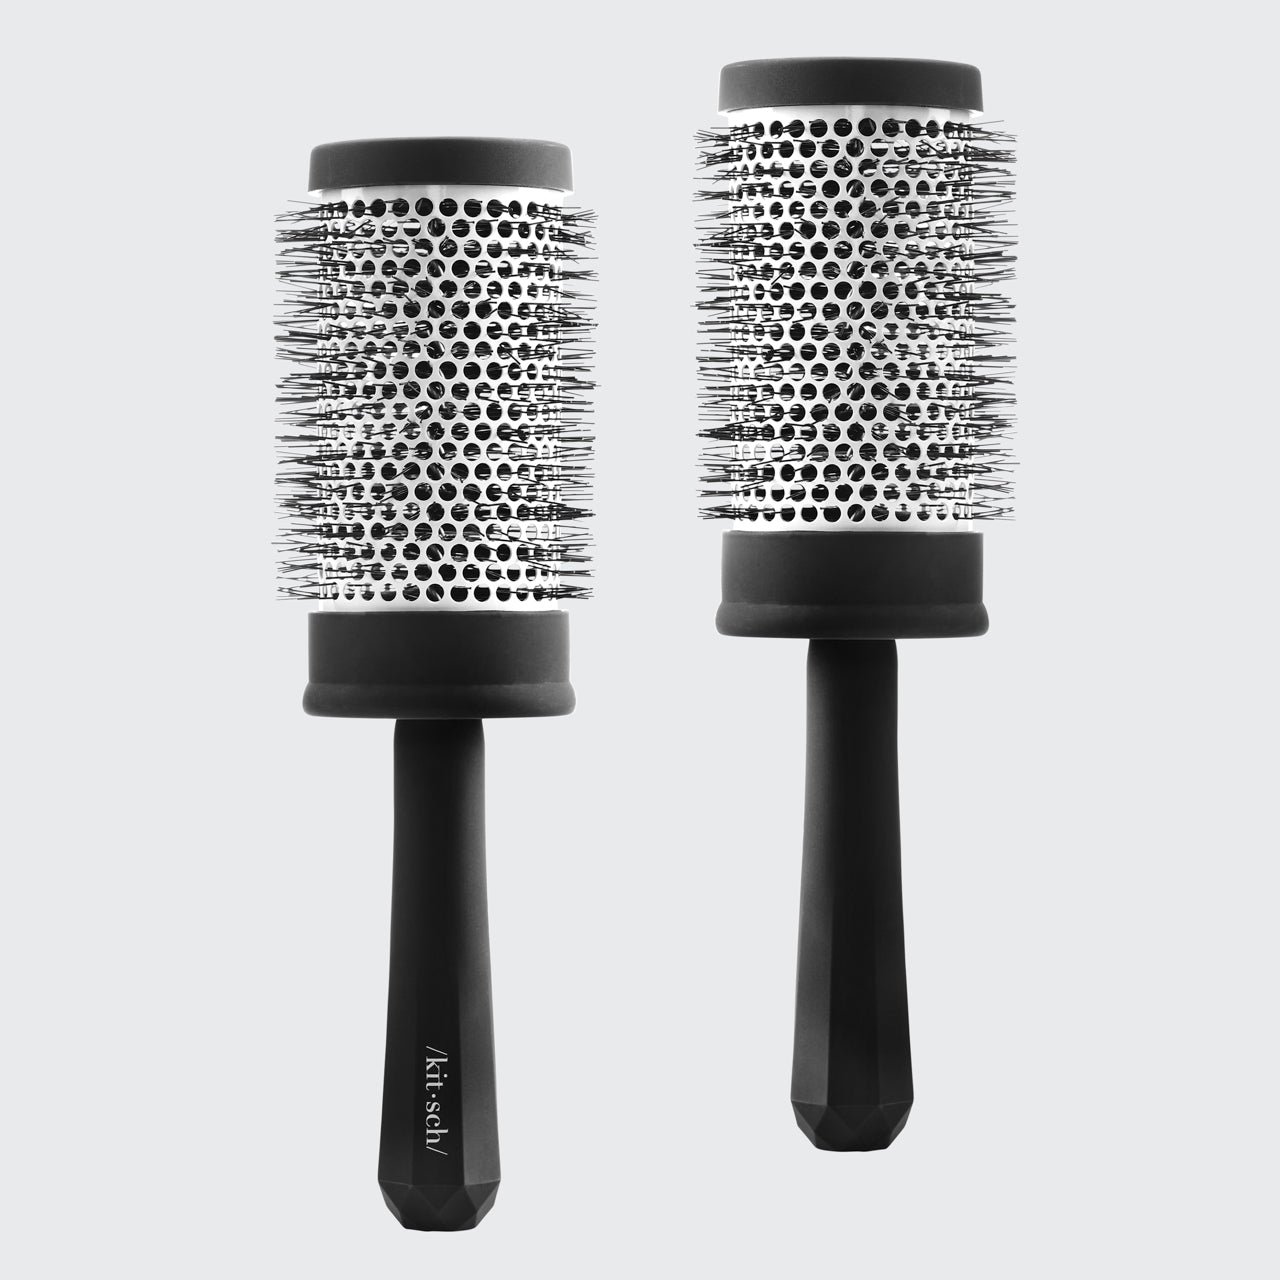 Consciously Created Round Blow Dry Brush